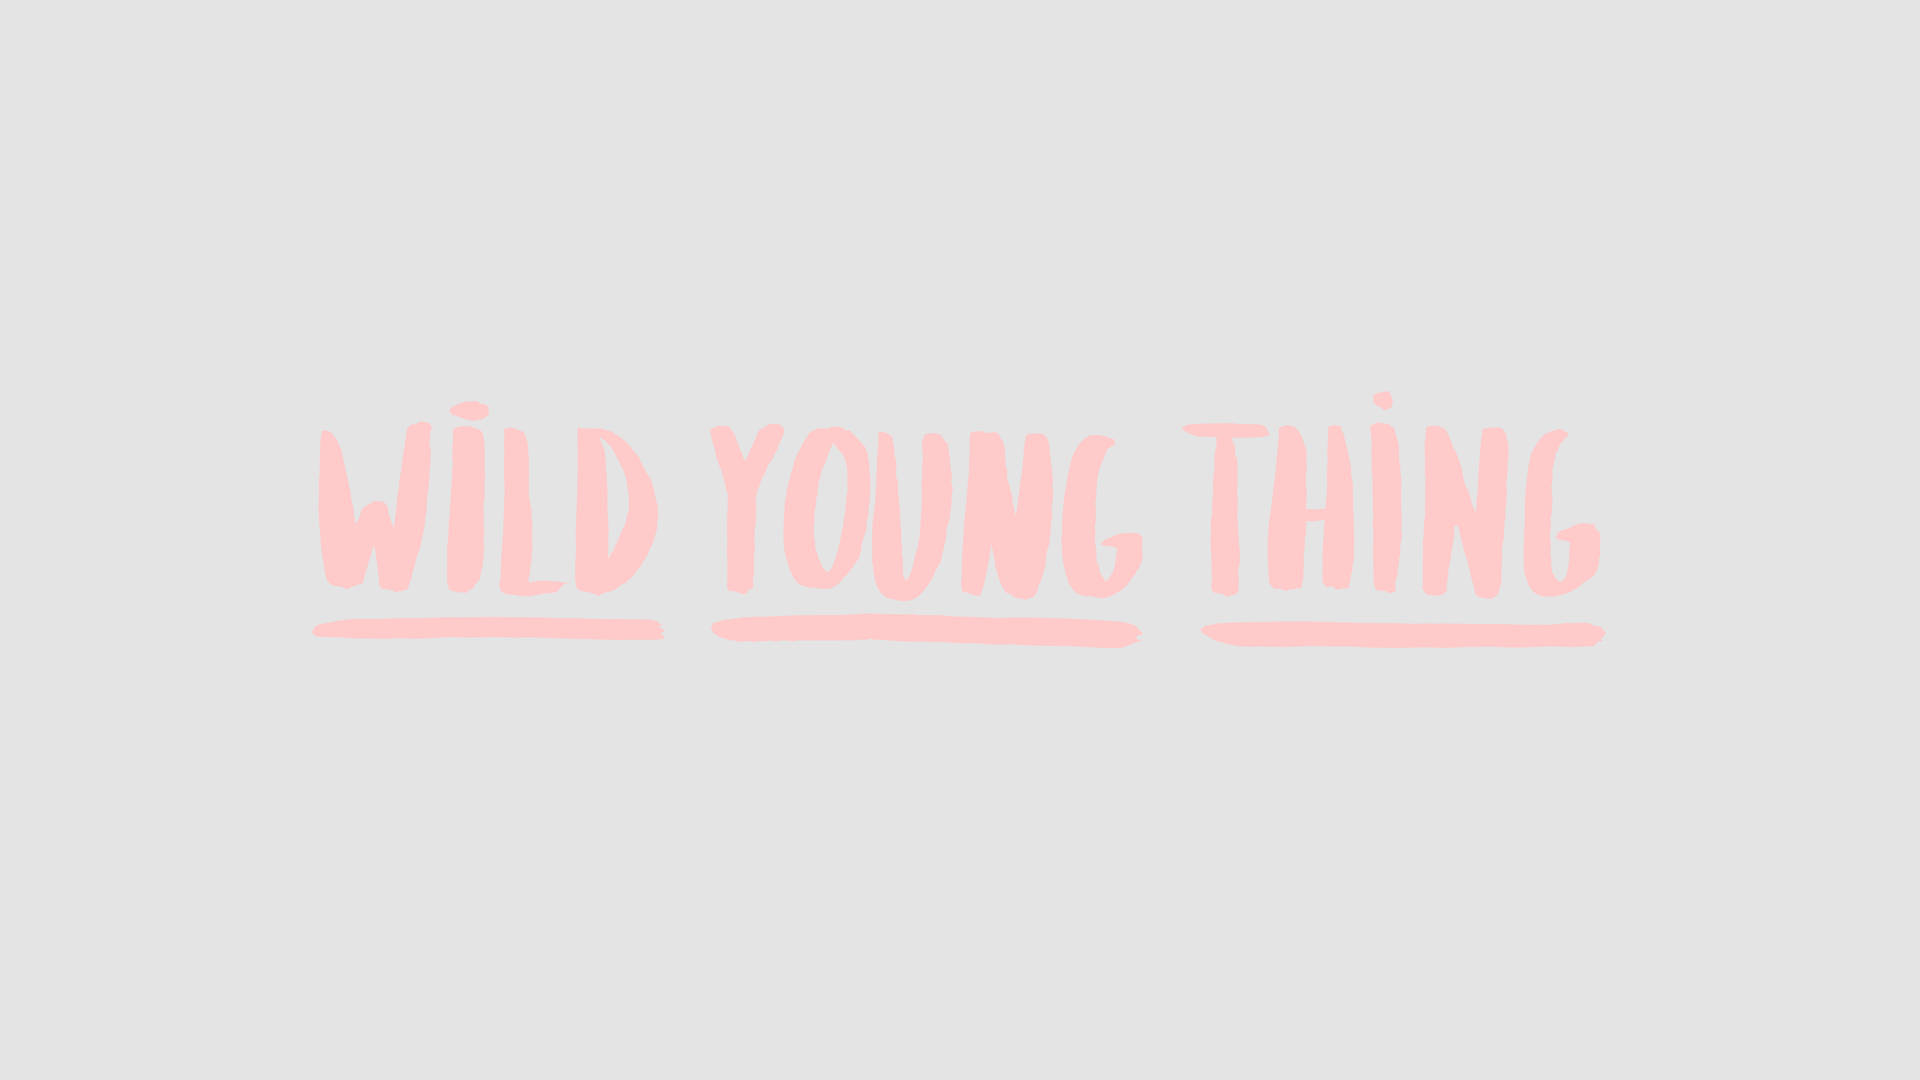 Wild Young Thing Pastel Aesthetic